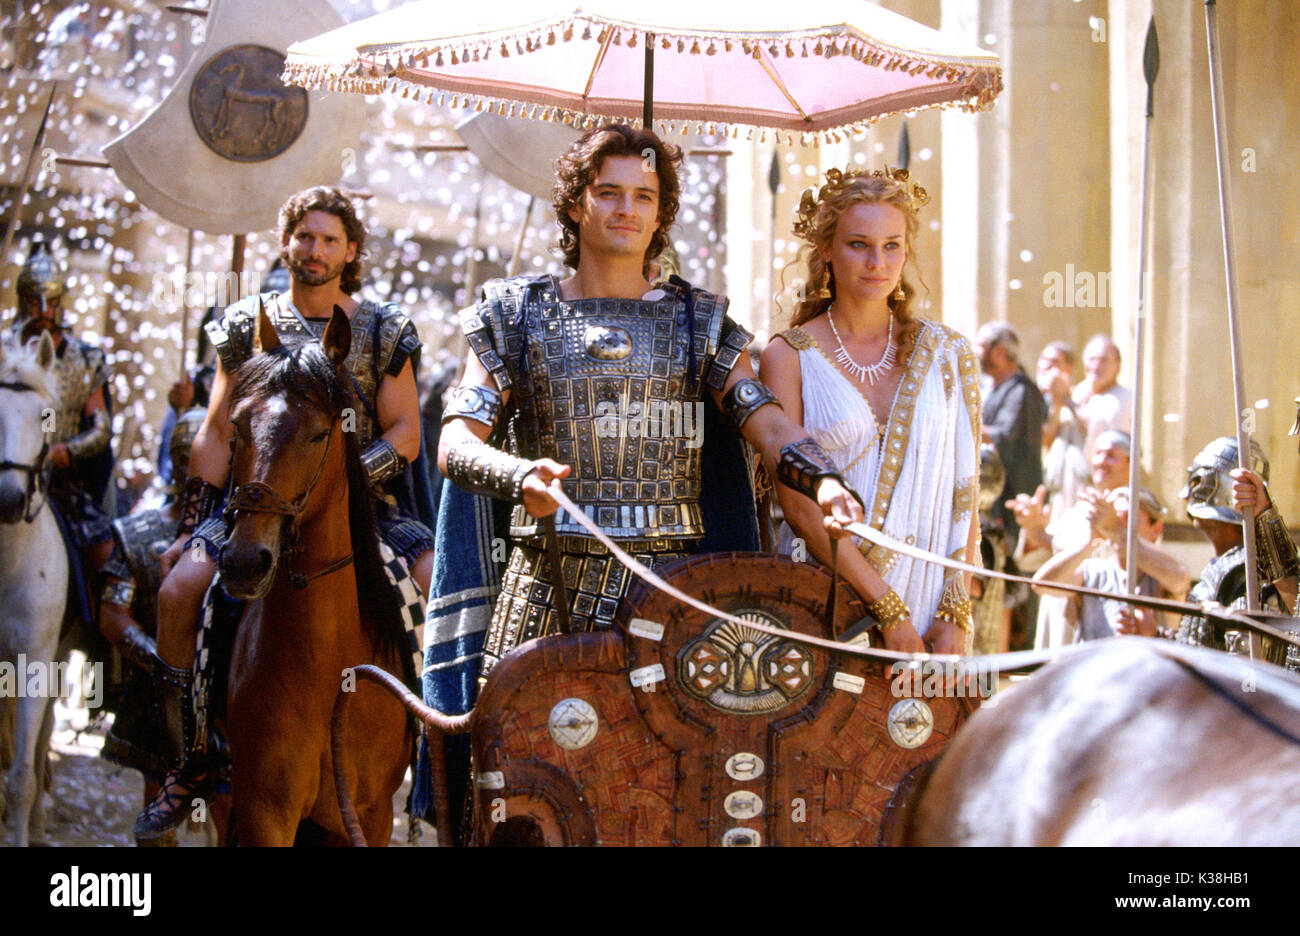 (L-r) ERIC BANA as 'Hector,' ORLANDO BLOOM as 'Paris' and DIANE KRUGER as 'Helen' in Warner Bros. Pictures' epic action adventure Troy, also starring Brad Pitt. PHOTOGRAPHS TO BE USED SOLELY FOR ADVERTISING, PROMOTION, PUBLICITY OR REVIEWS OF THIS SPECIFIC MOTION PICTURE AND TO REMAIN THE PROPERTY OF THE STUDIO. NOT FOR SALE OR REDISTRIBUTION.    (L-r) ERIC BANA as 'Hector,' ORLANDO BLOOM as 'Paris' and DIANE KRUGER as 'Helen' in Warner Bros. Pictures' epic action adventure Troy, also starring Brad Pitt. PHOTOGRAPHS TO BE USED SOLELY FOR ADVERTISING, PROMOTION, PUBLICIT Stock Photo